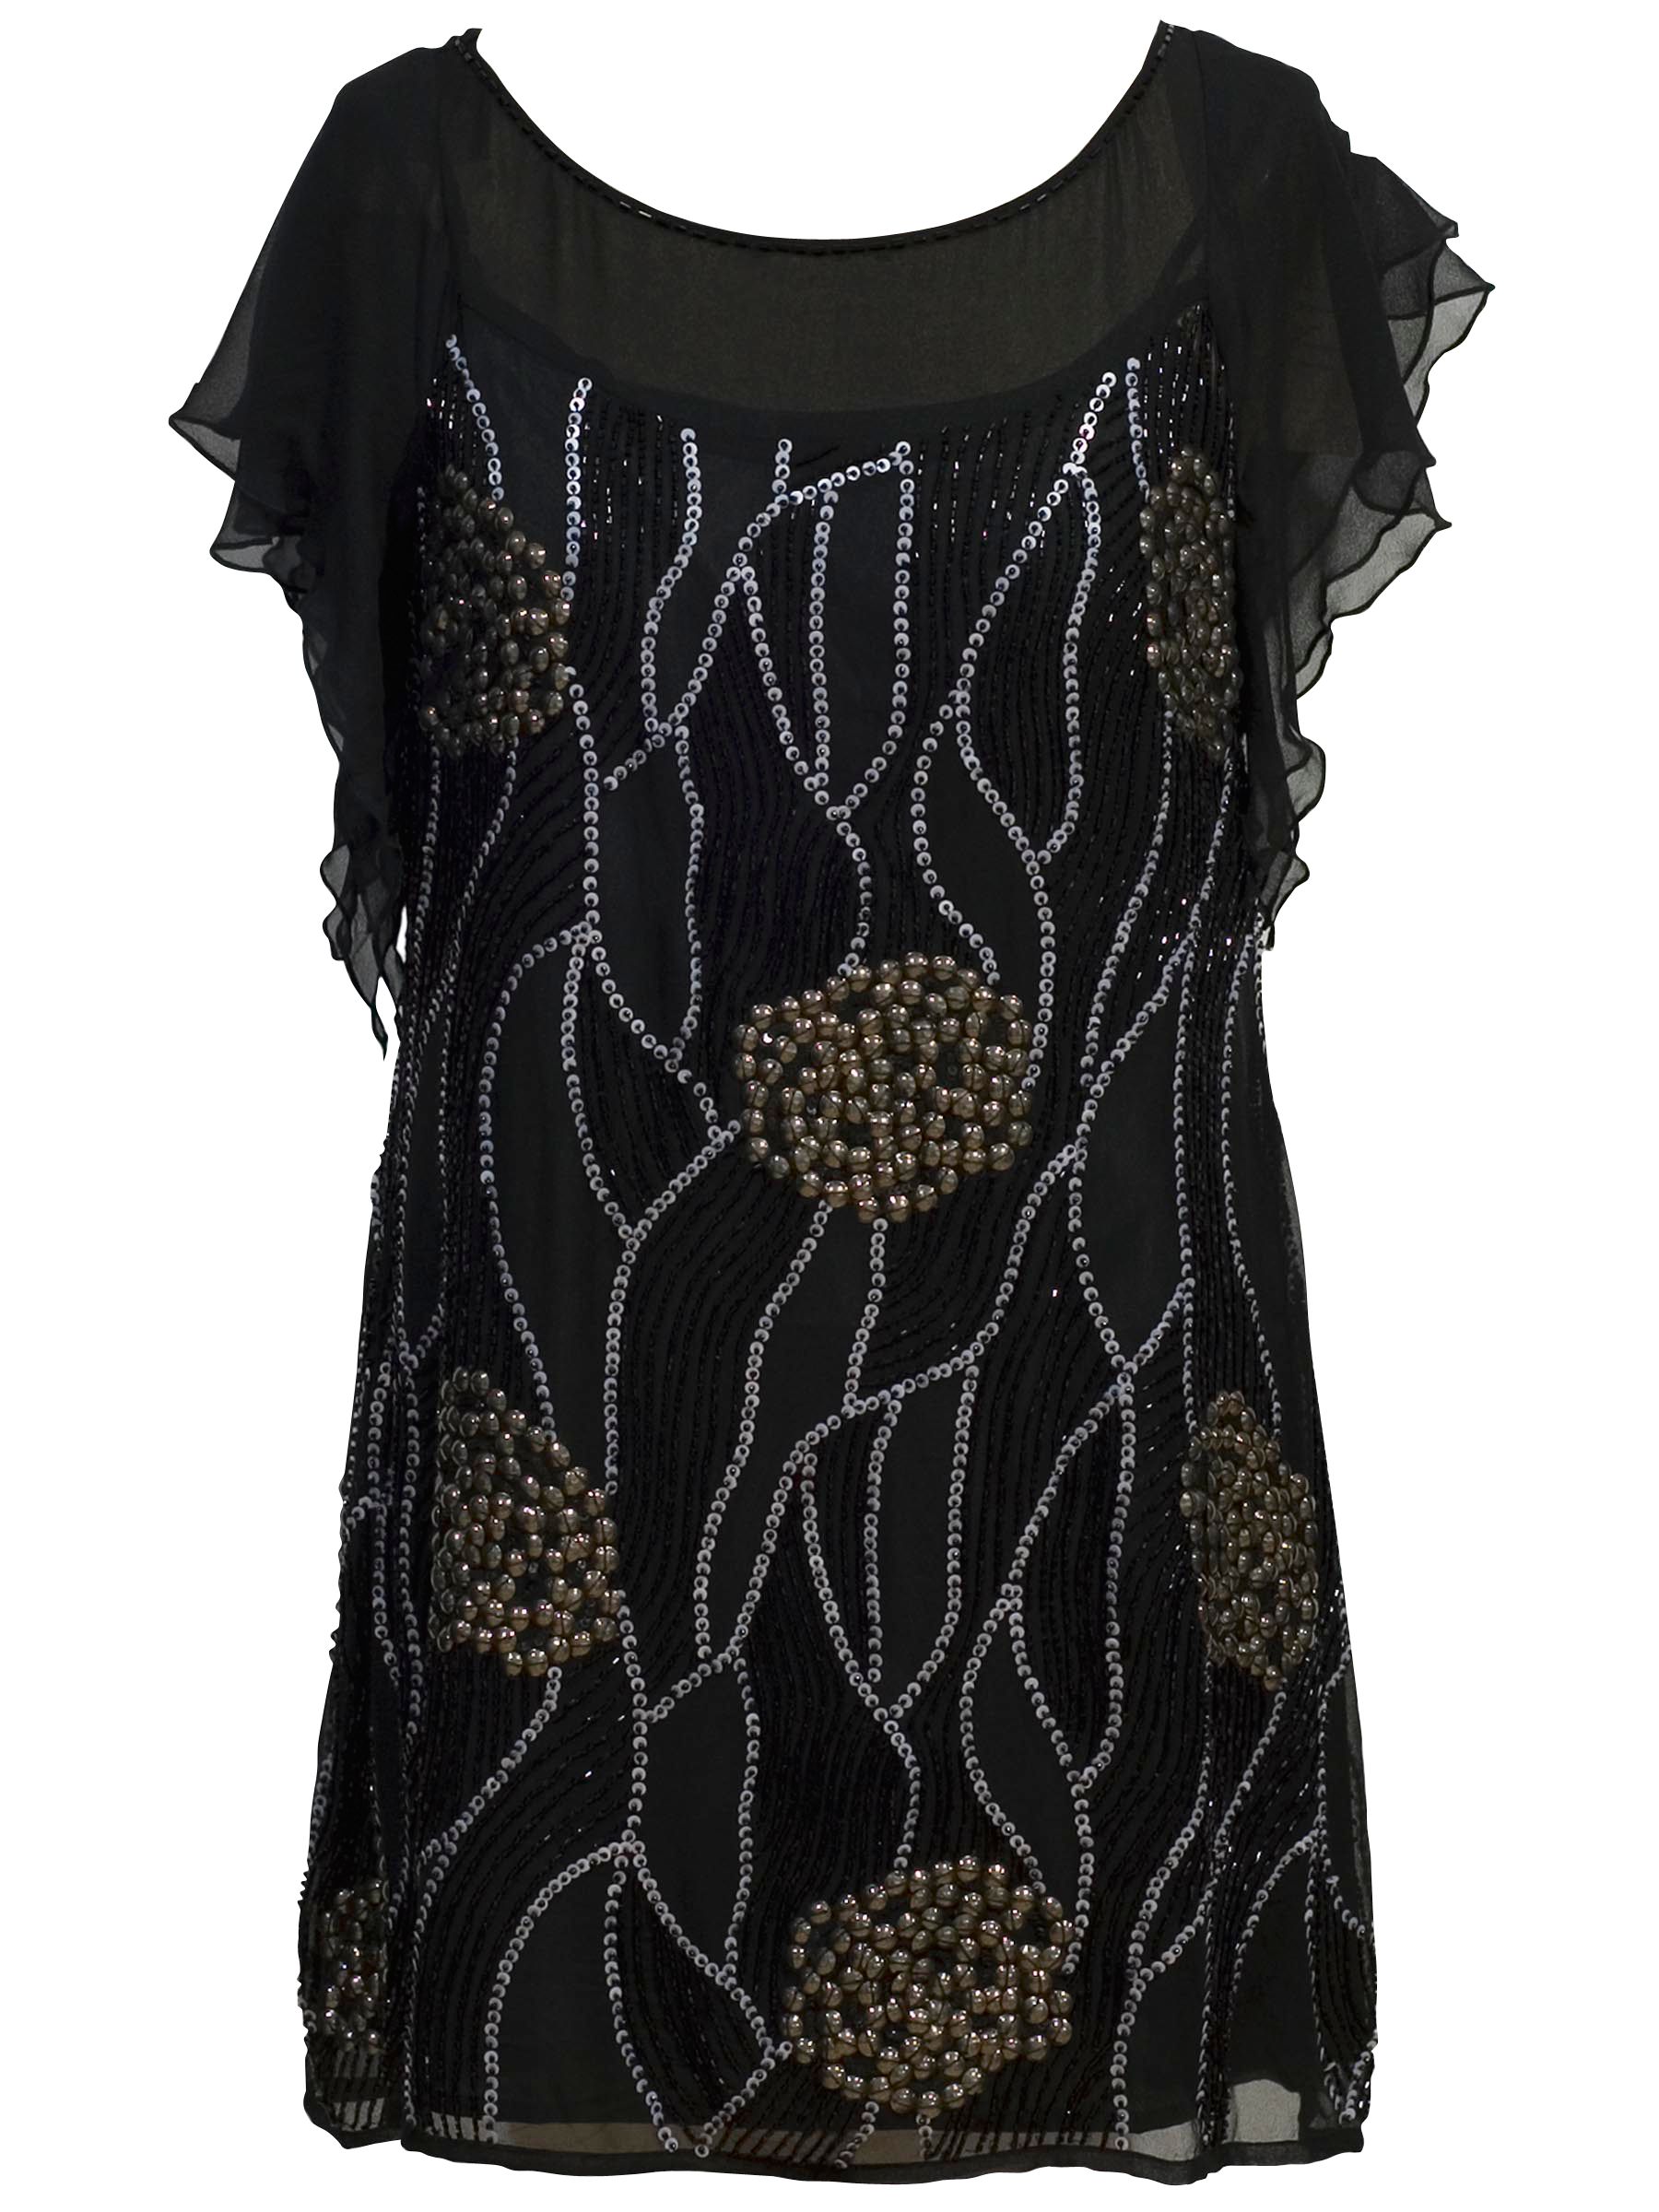 Chesca Now By Chesca Silk Beaded Linen Tunic, Black at John Lewis